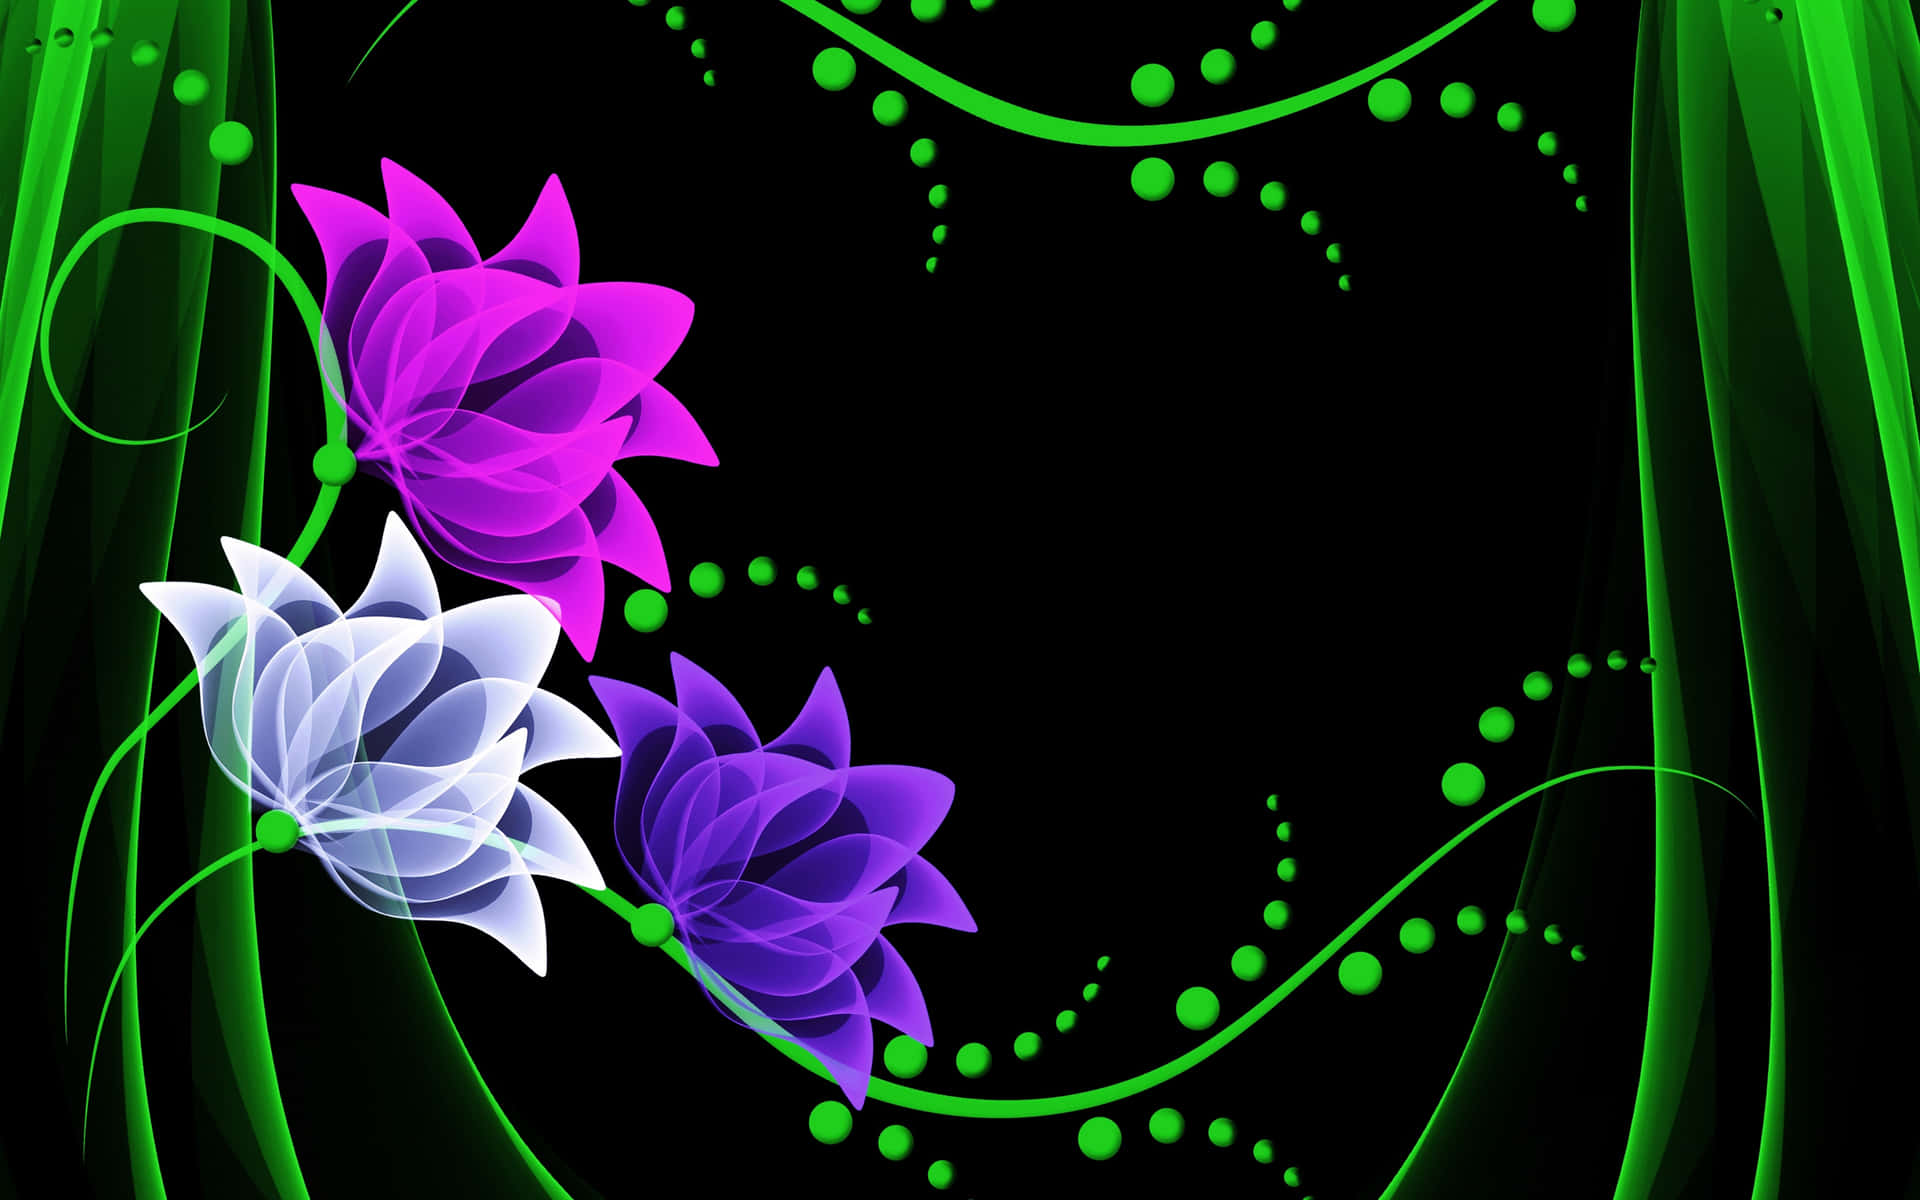 Vibrant Neon Floral Abstract4 K Wallpaper